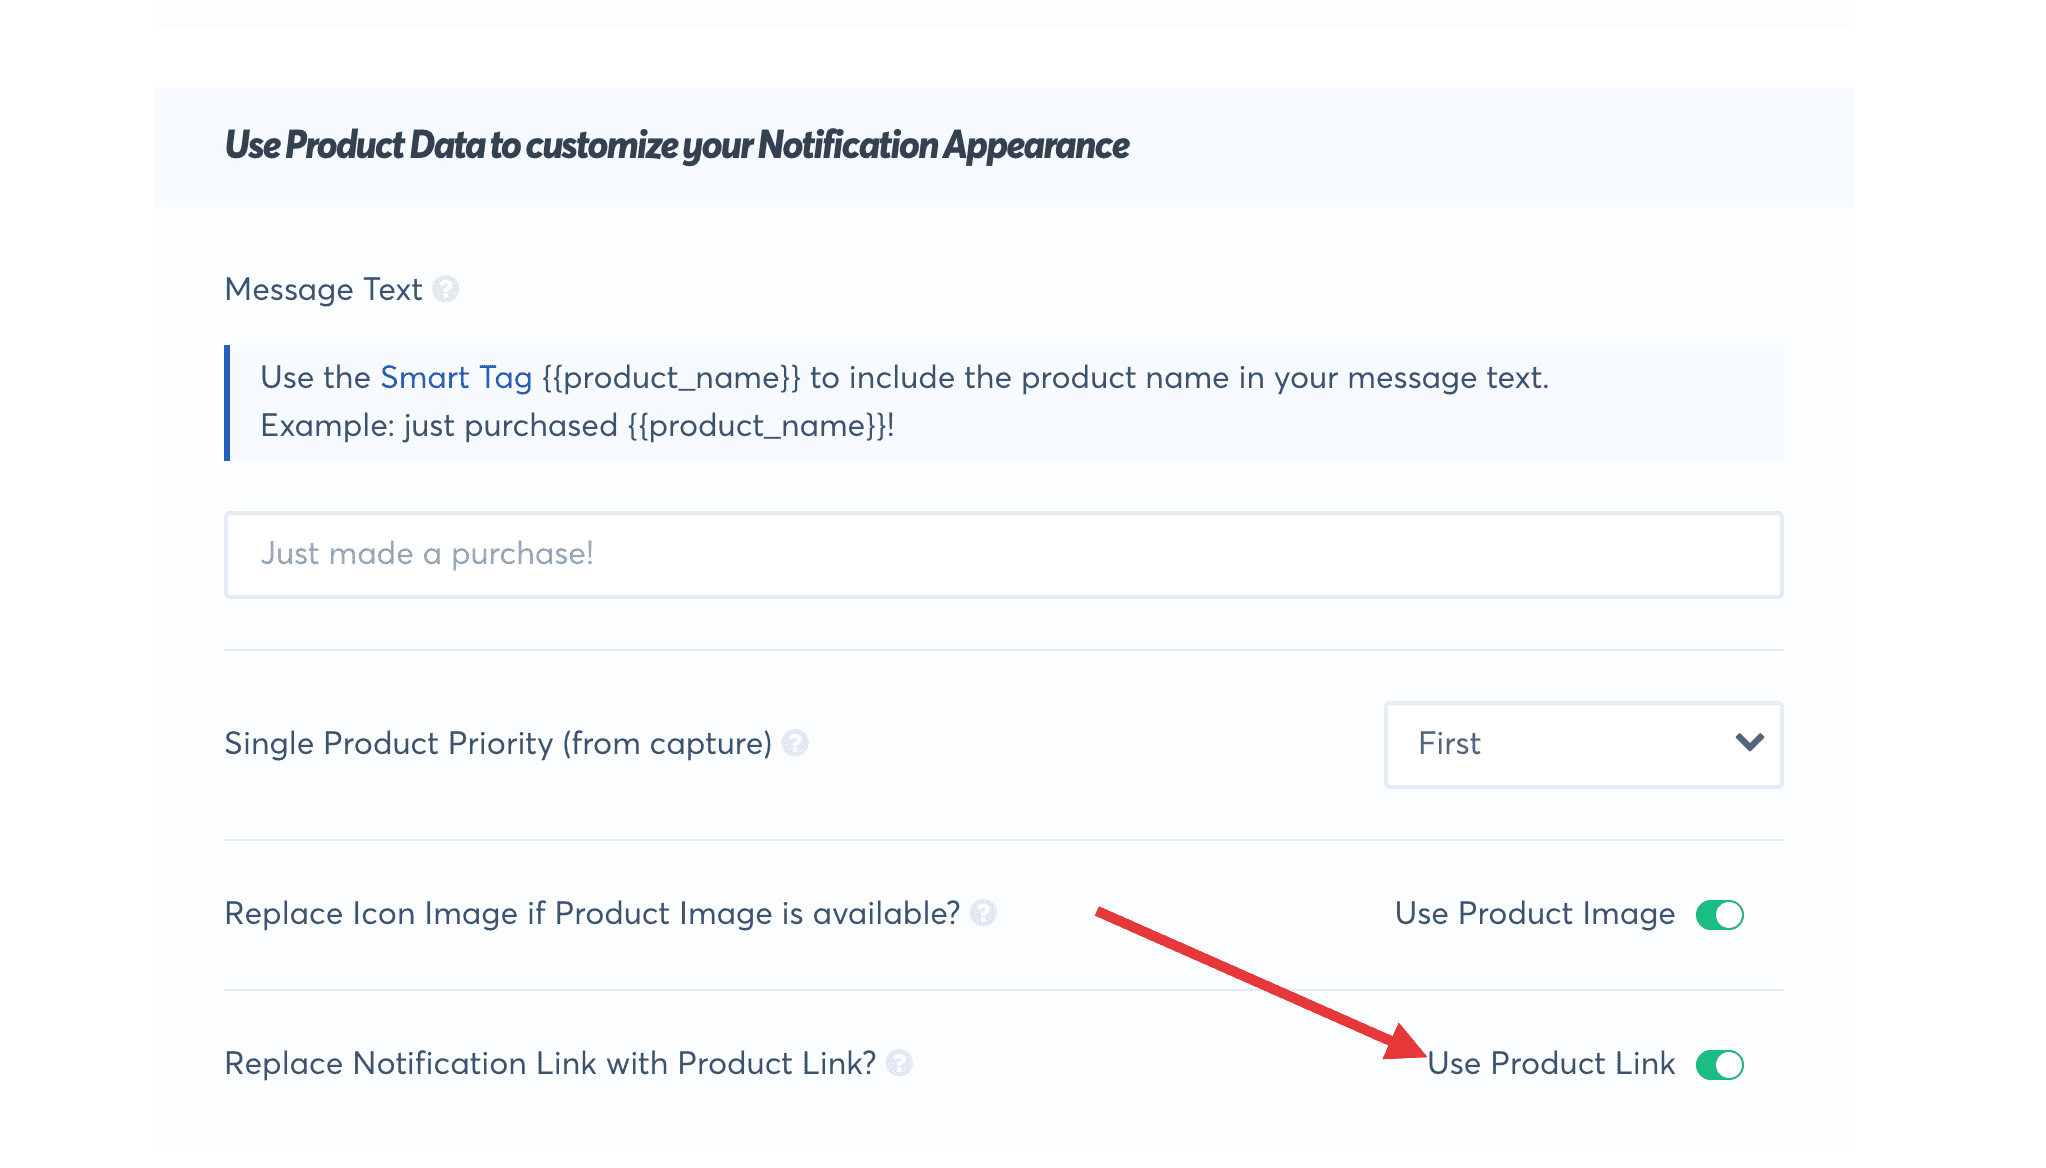 toggle on use product link option